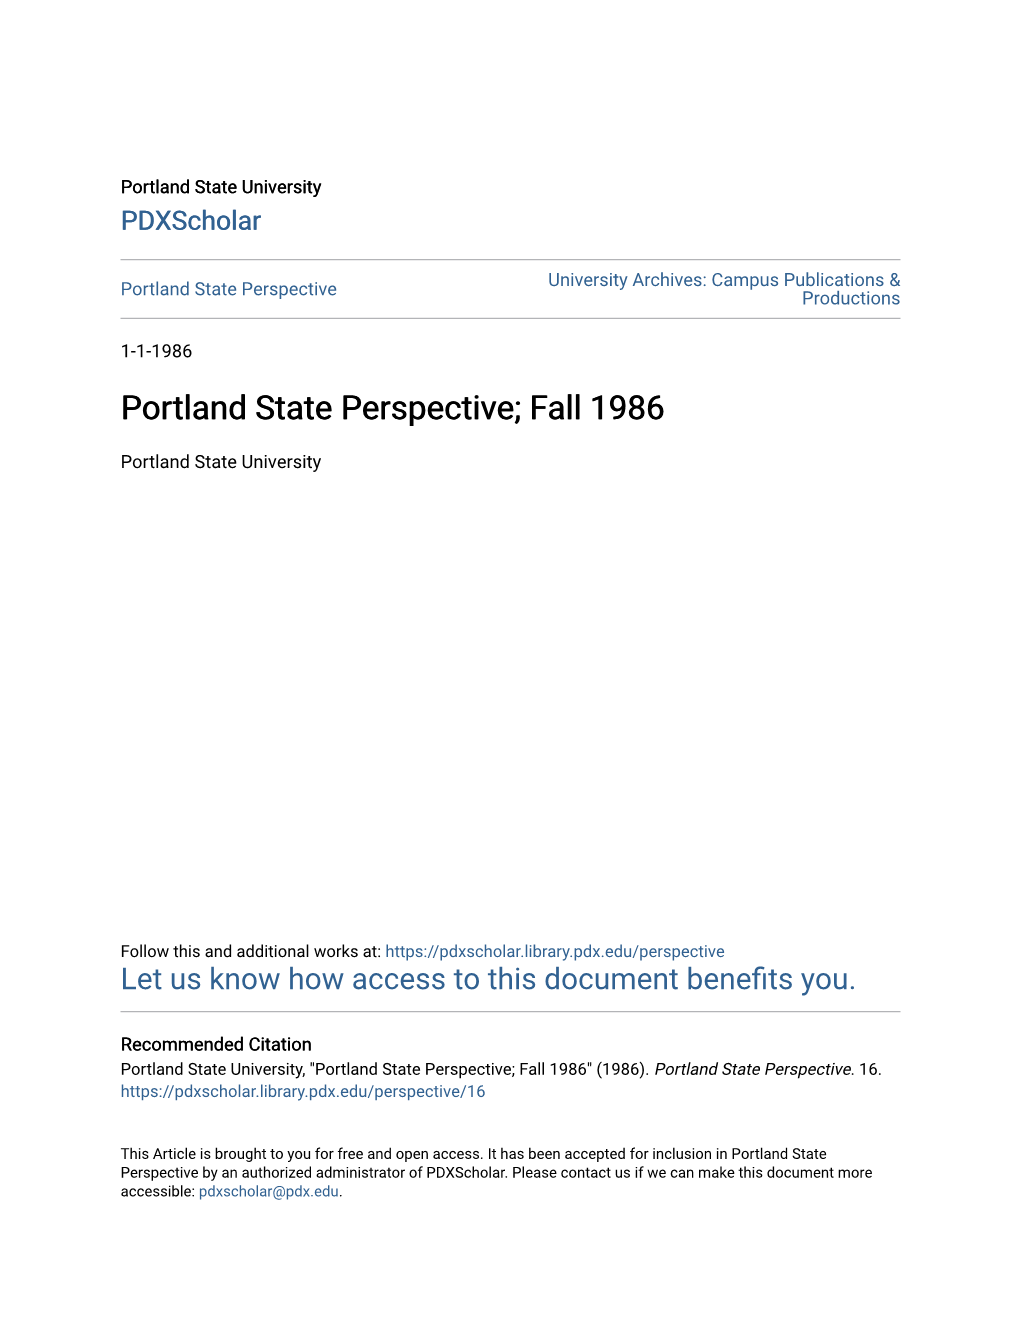 Portland State Perspective; Fall 1986